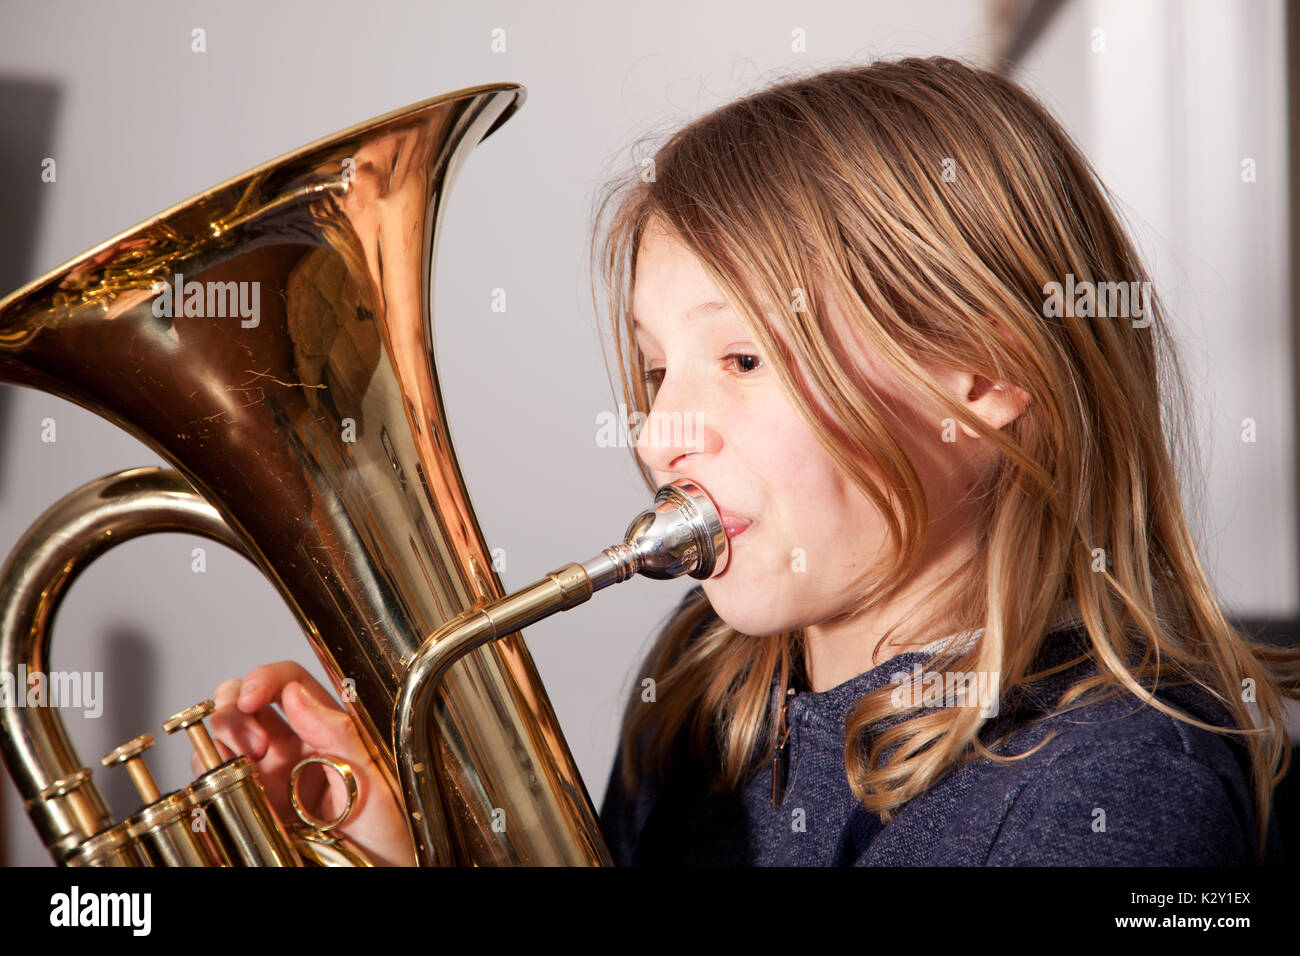 Profile of young girl playing baritone instrument Stock Photo - Alamy